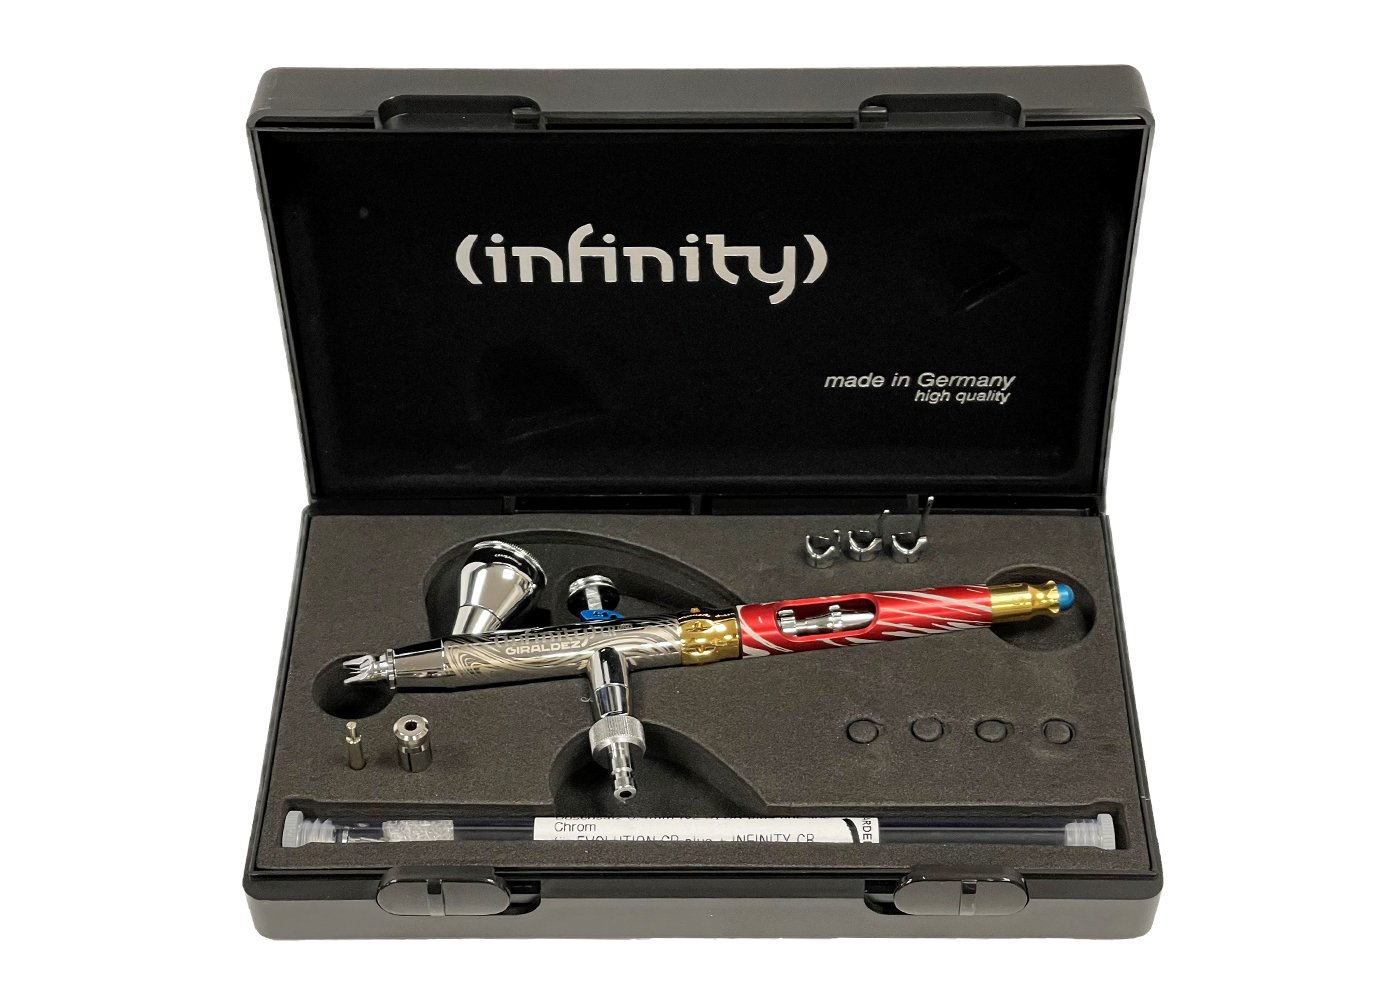 Harder & Steenbeck Infinity series airbrush all versions up to 2in1 CR Plus